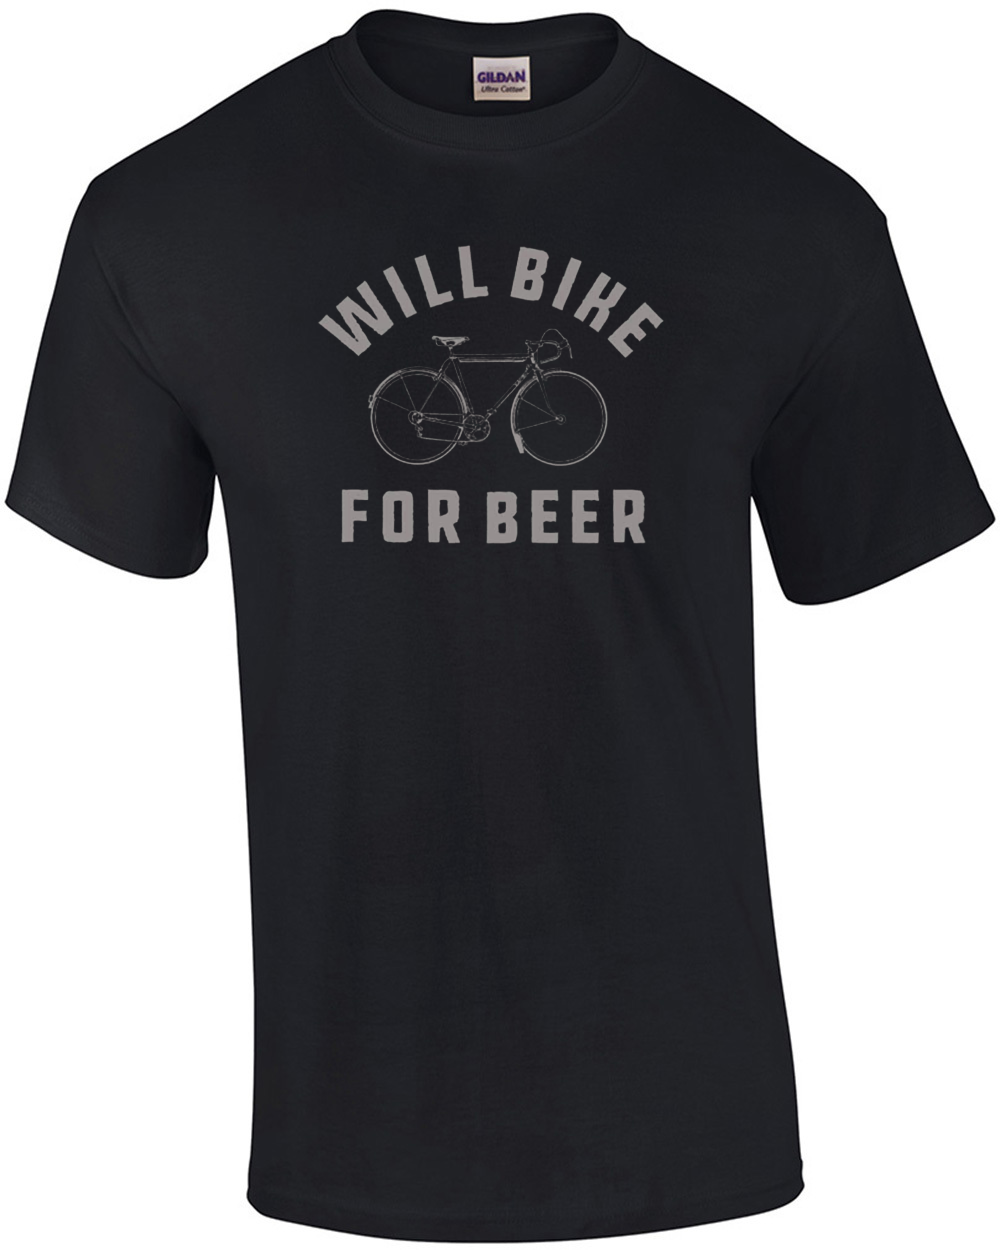 Will Bike For Beer Funny Novelty T-Shirt